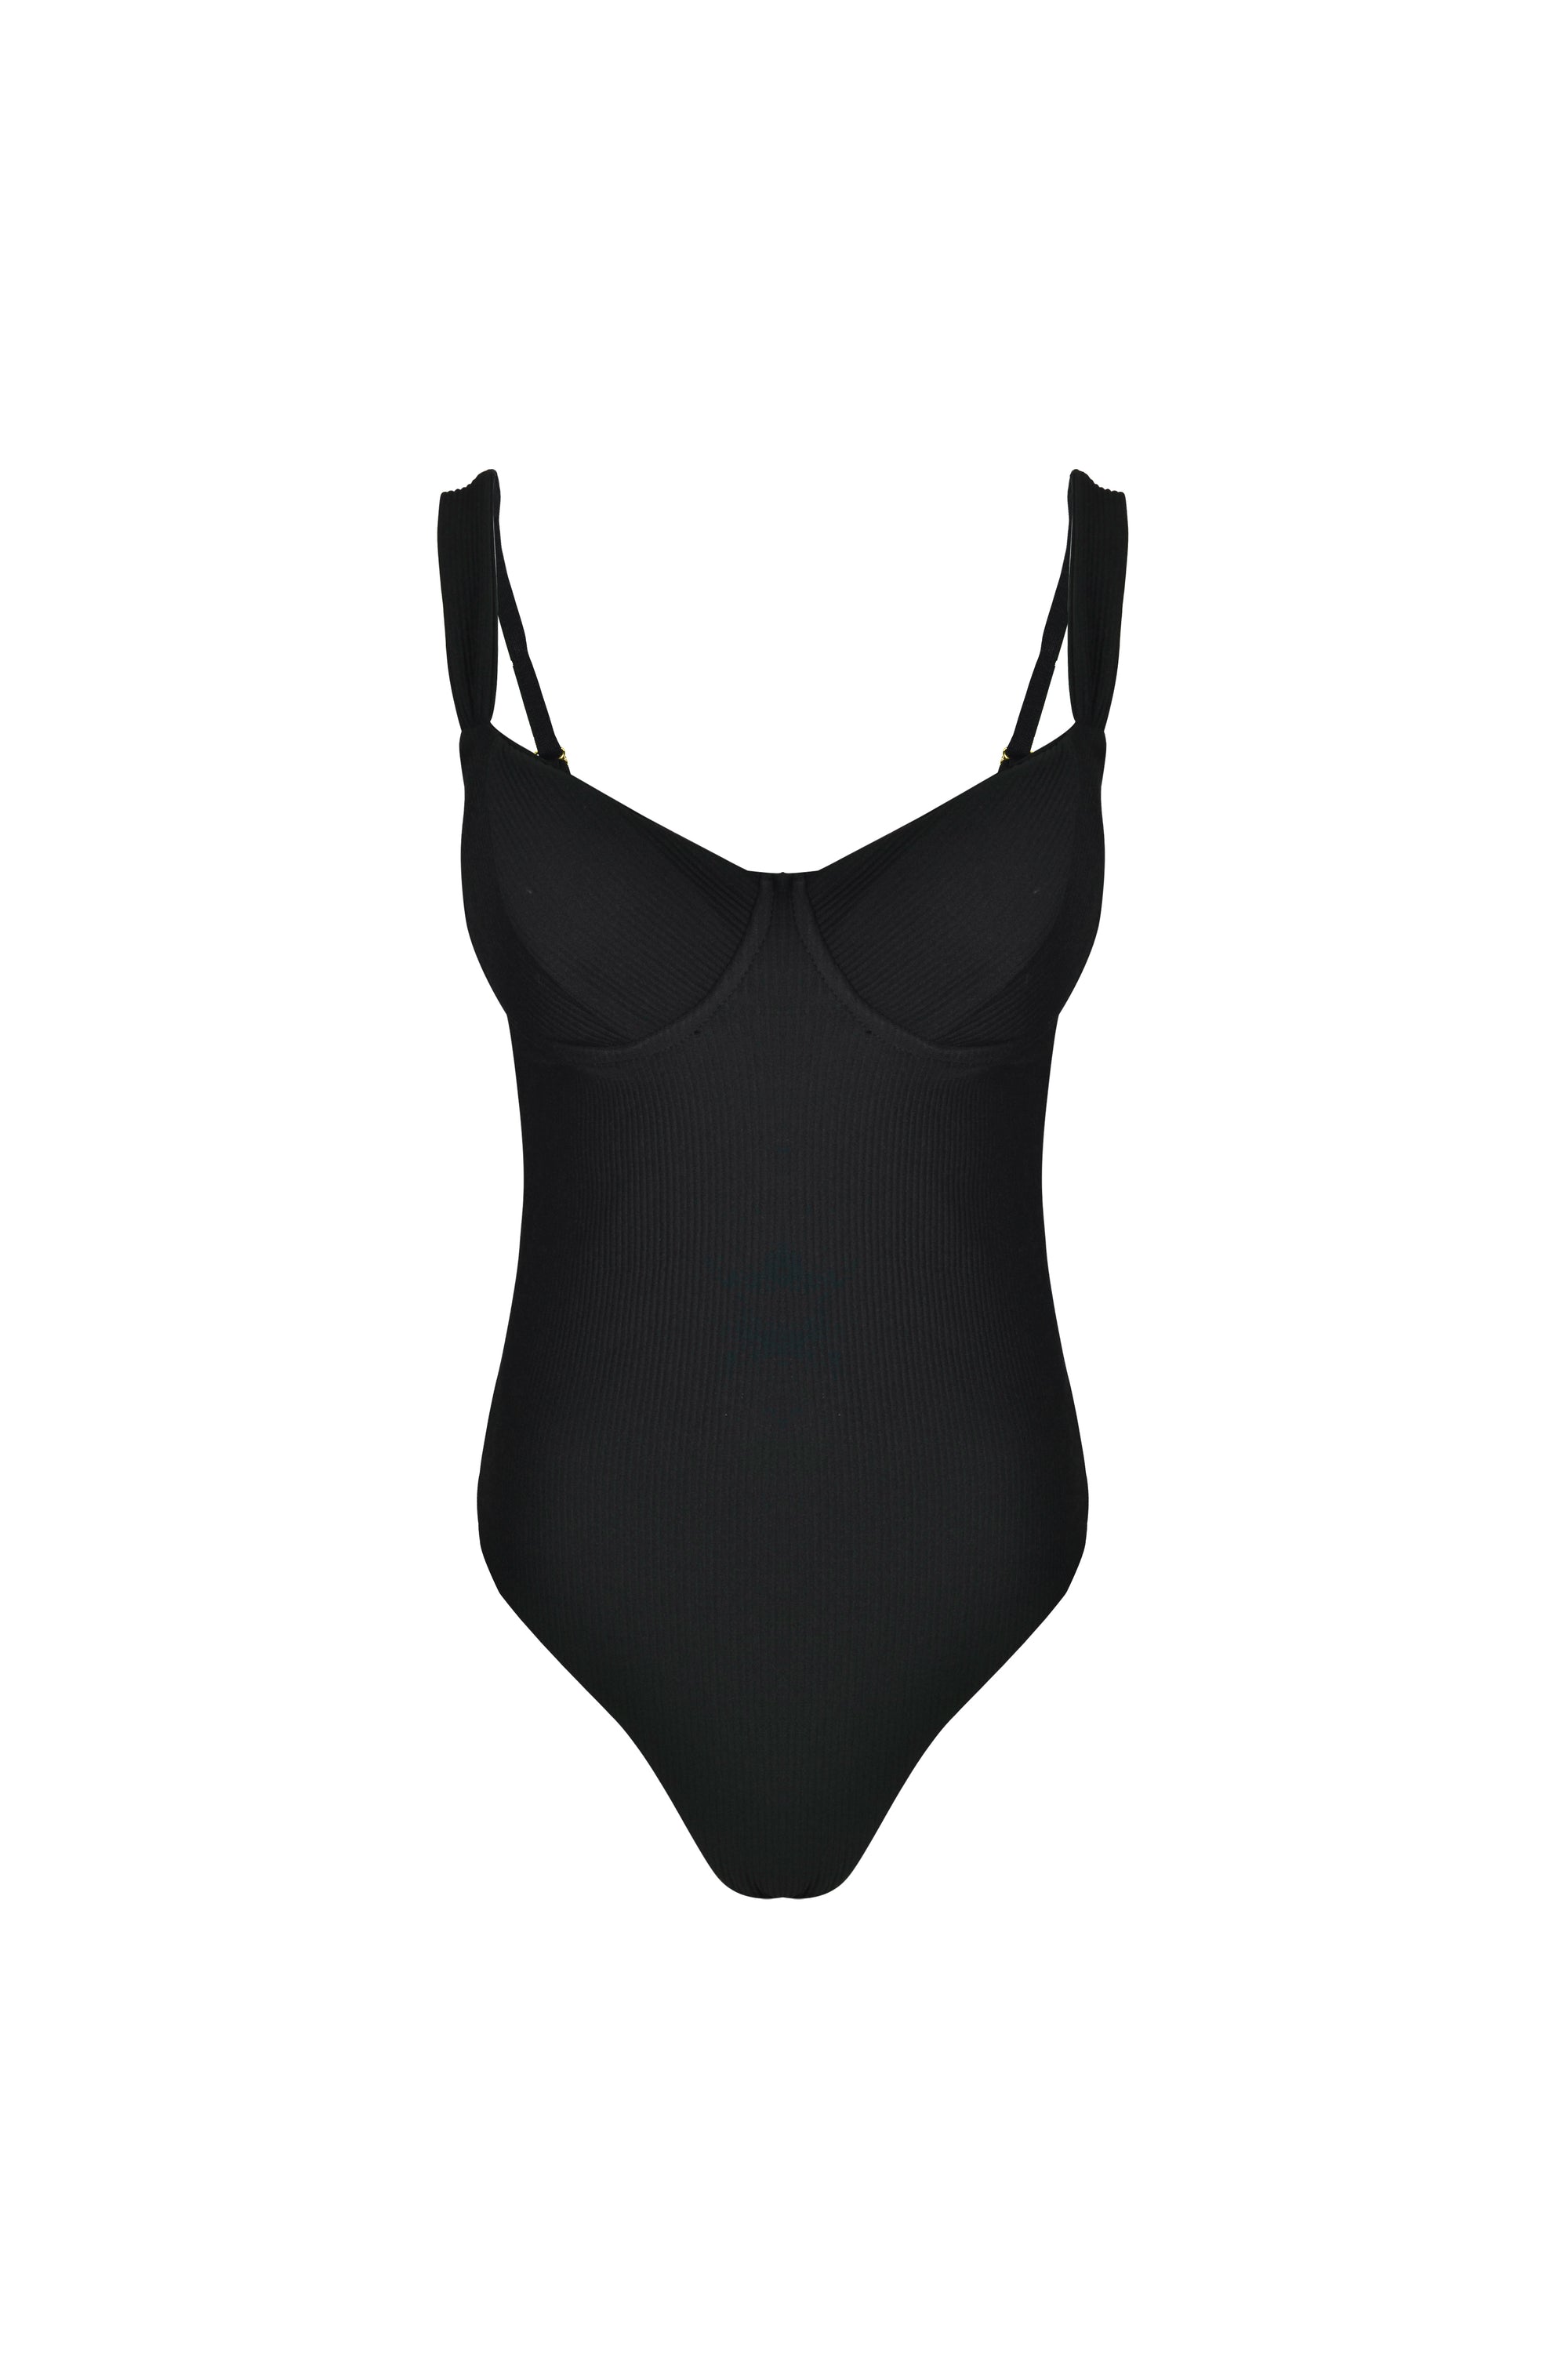 Front of a Black one piece bathing suit on white background 